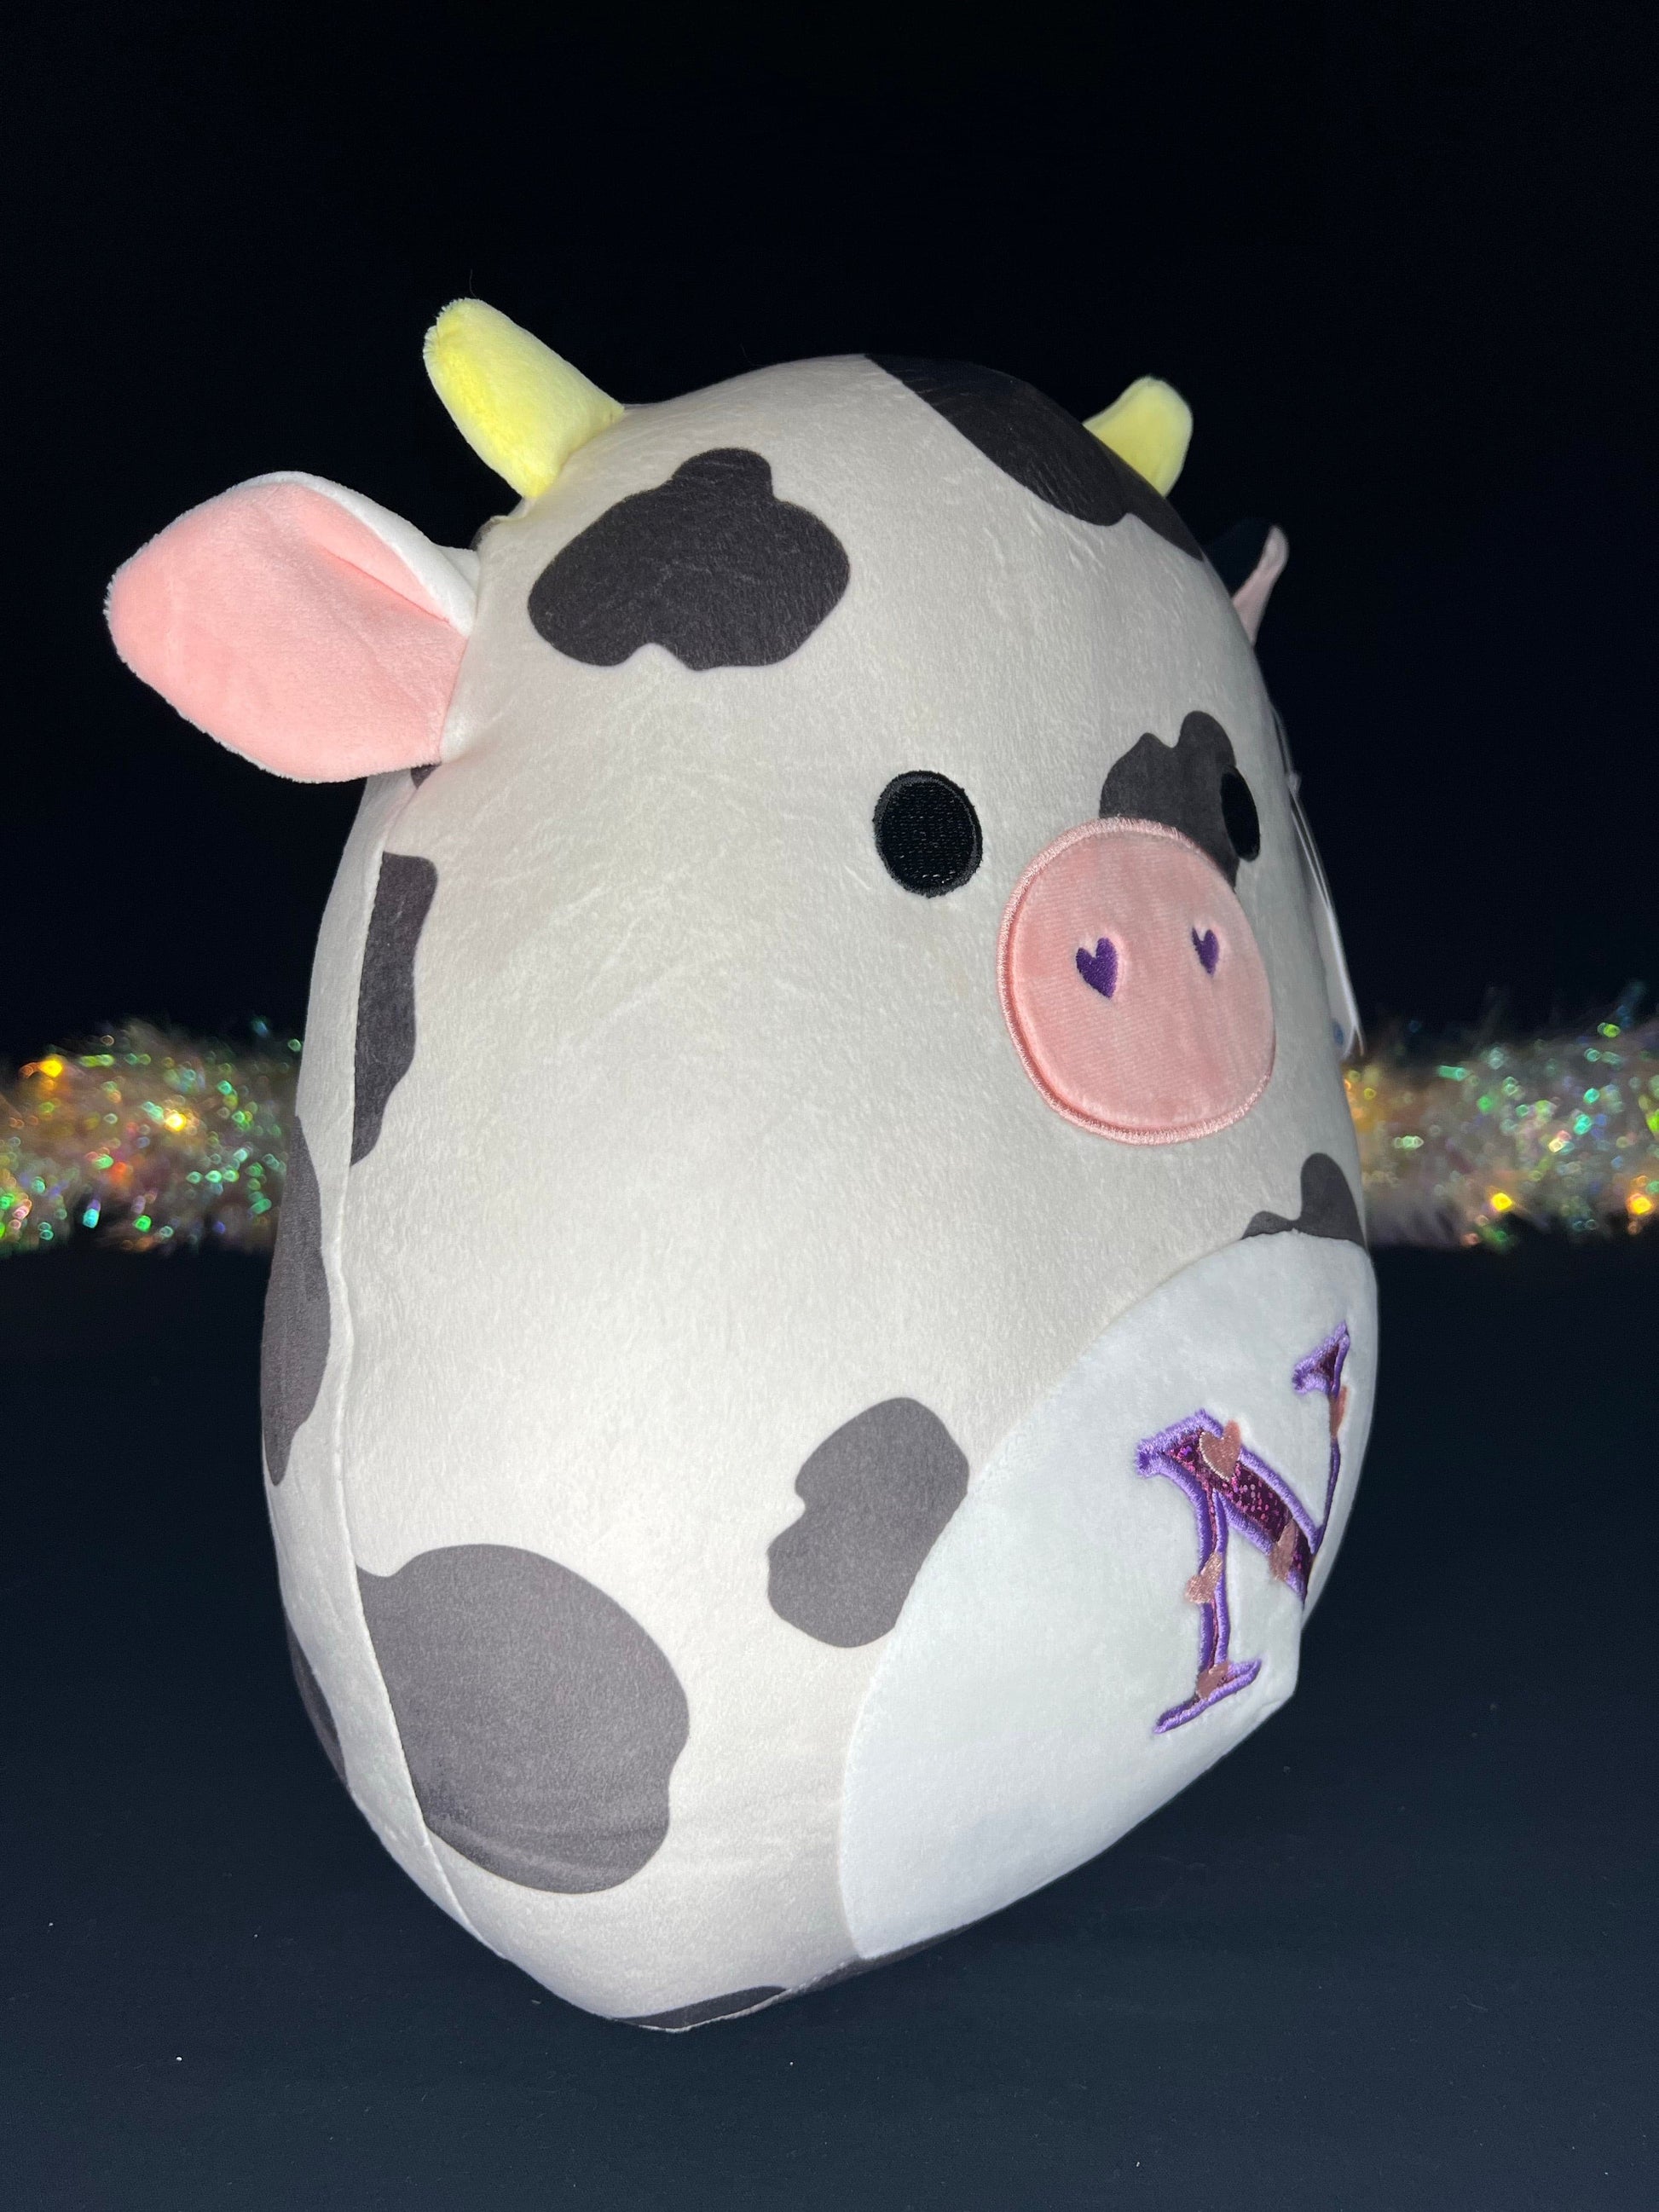 Squishmallow 12” Colin the Cow “Letter N” Plush | Sweet Magnolia Charms.